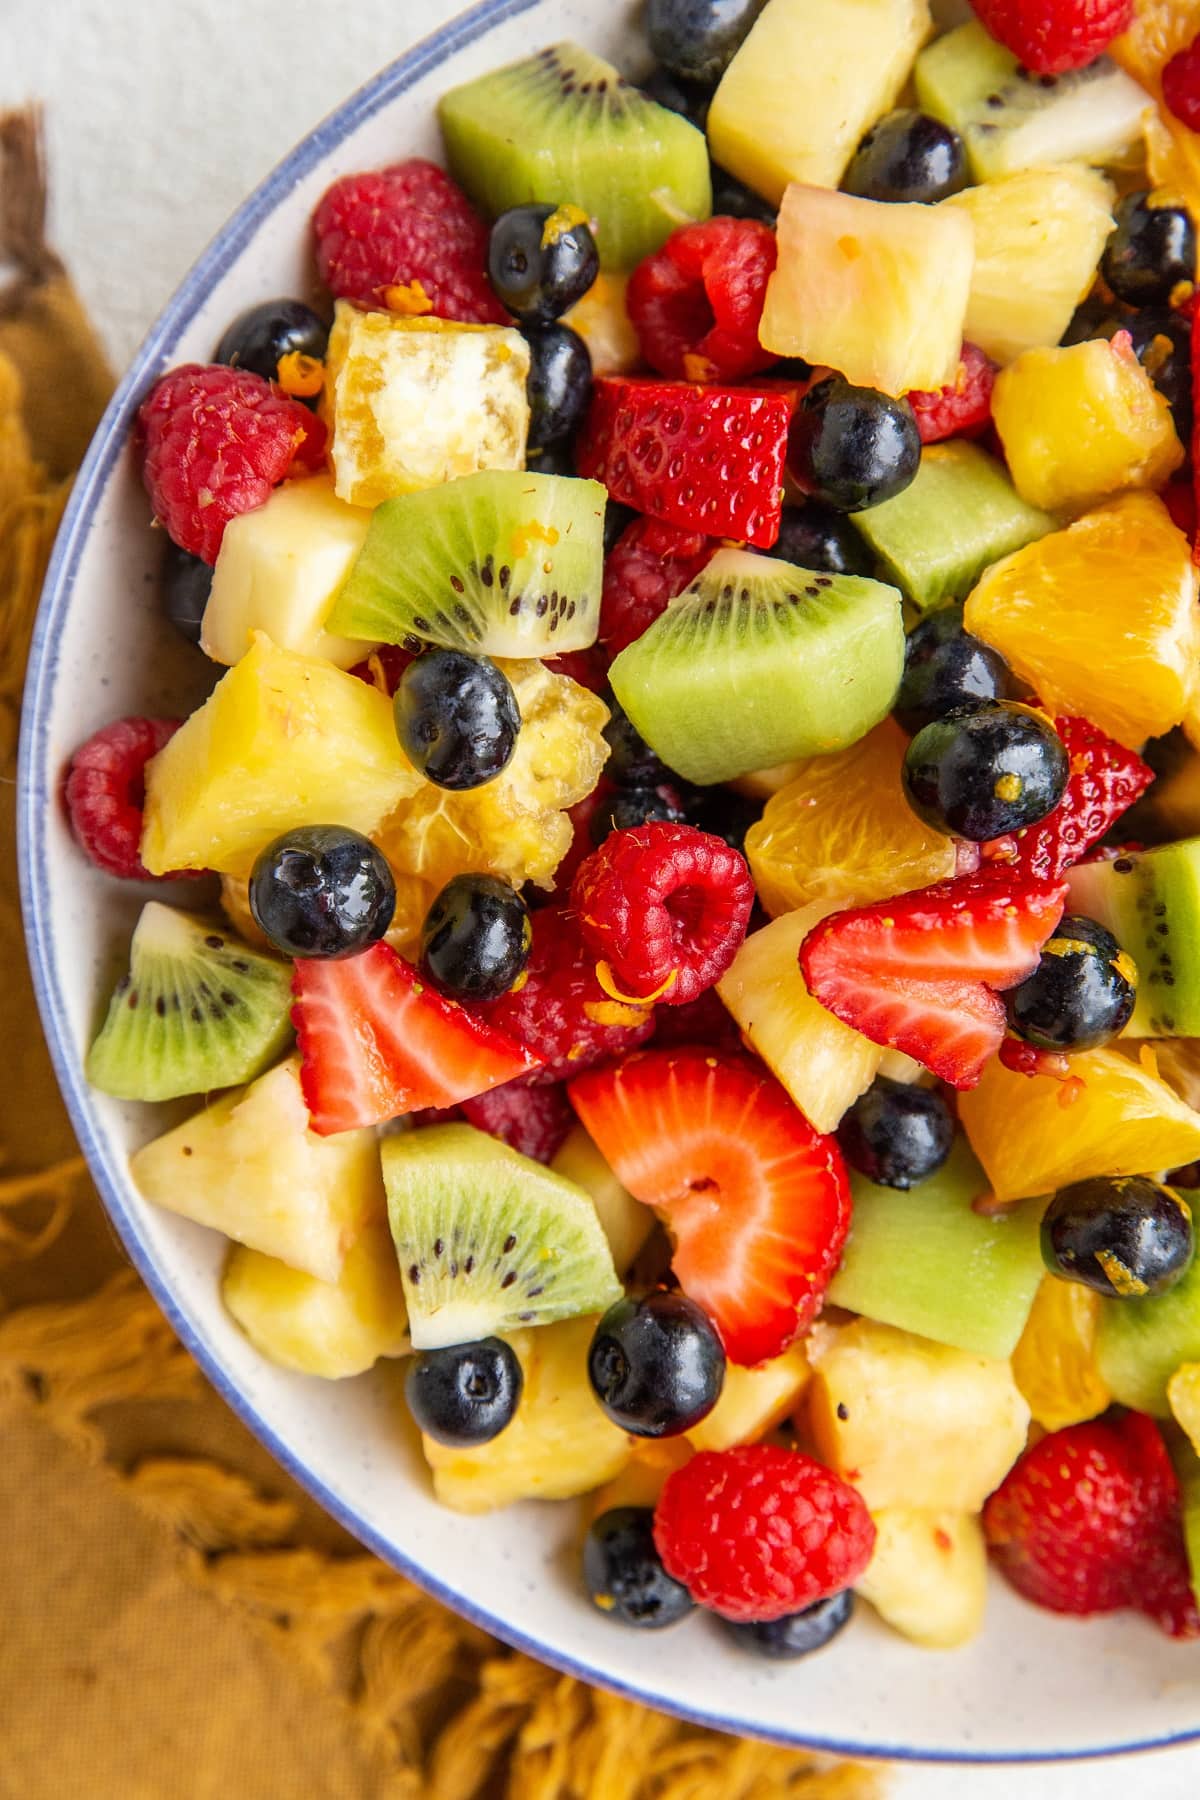 Big bowl of fruit salad with a citrus dressing in a blue rimmed white serving bowl.